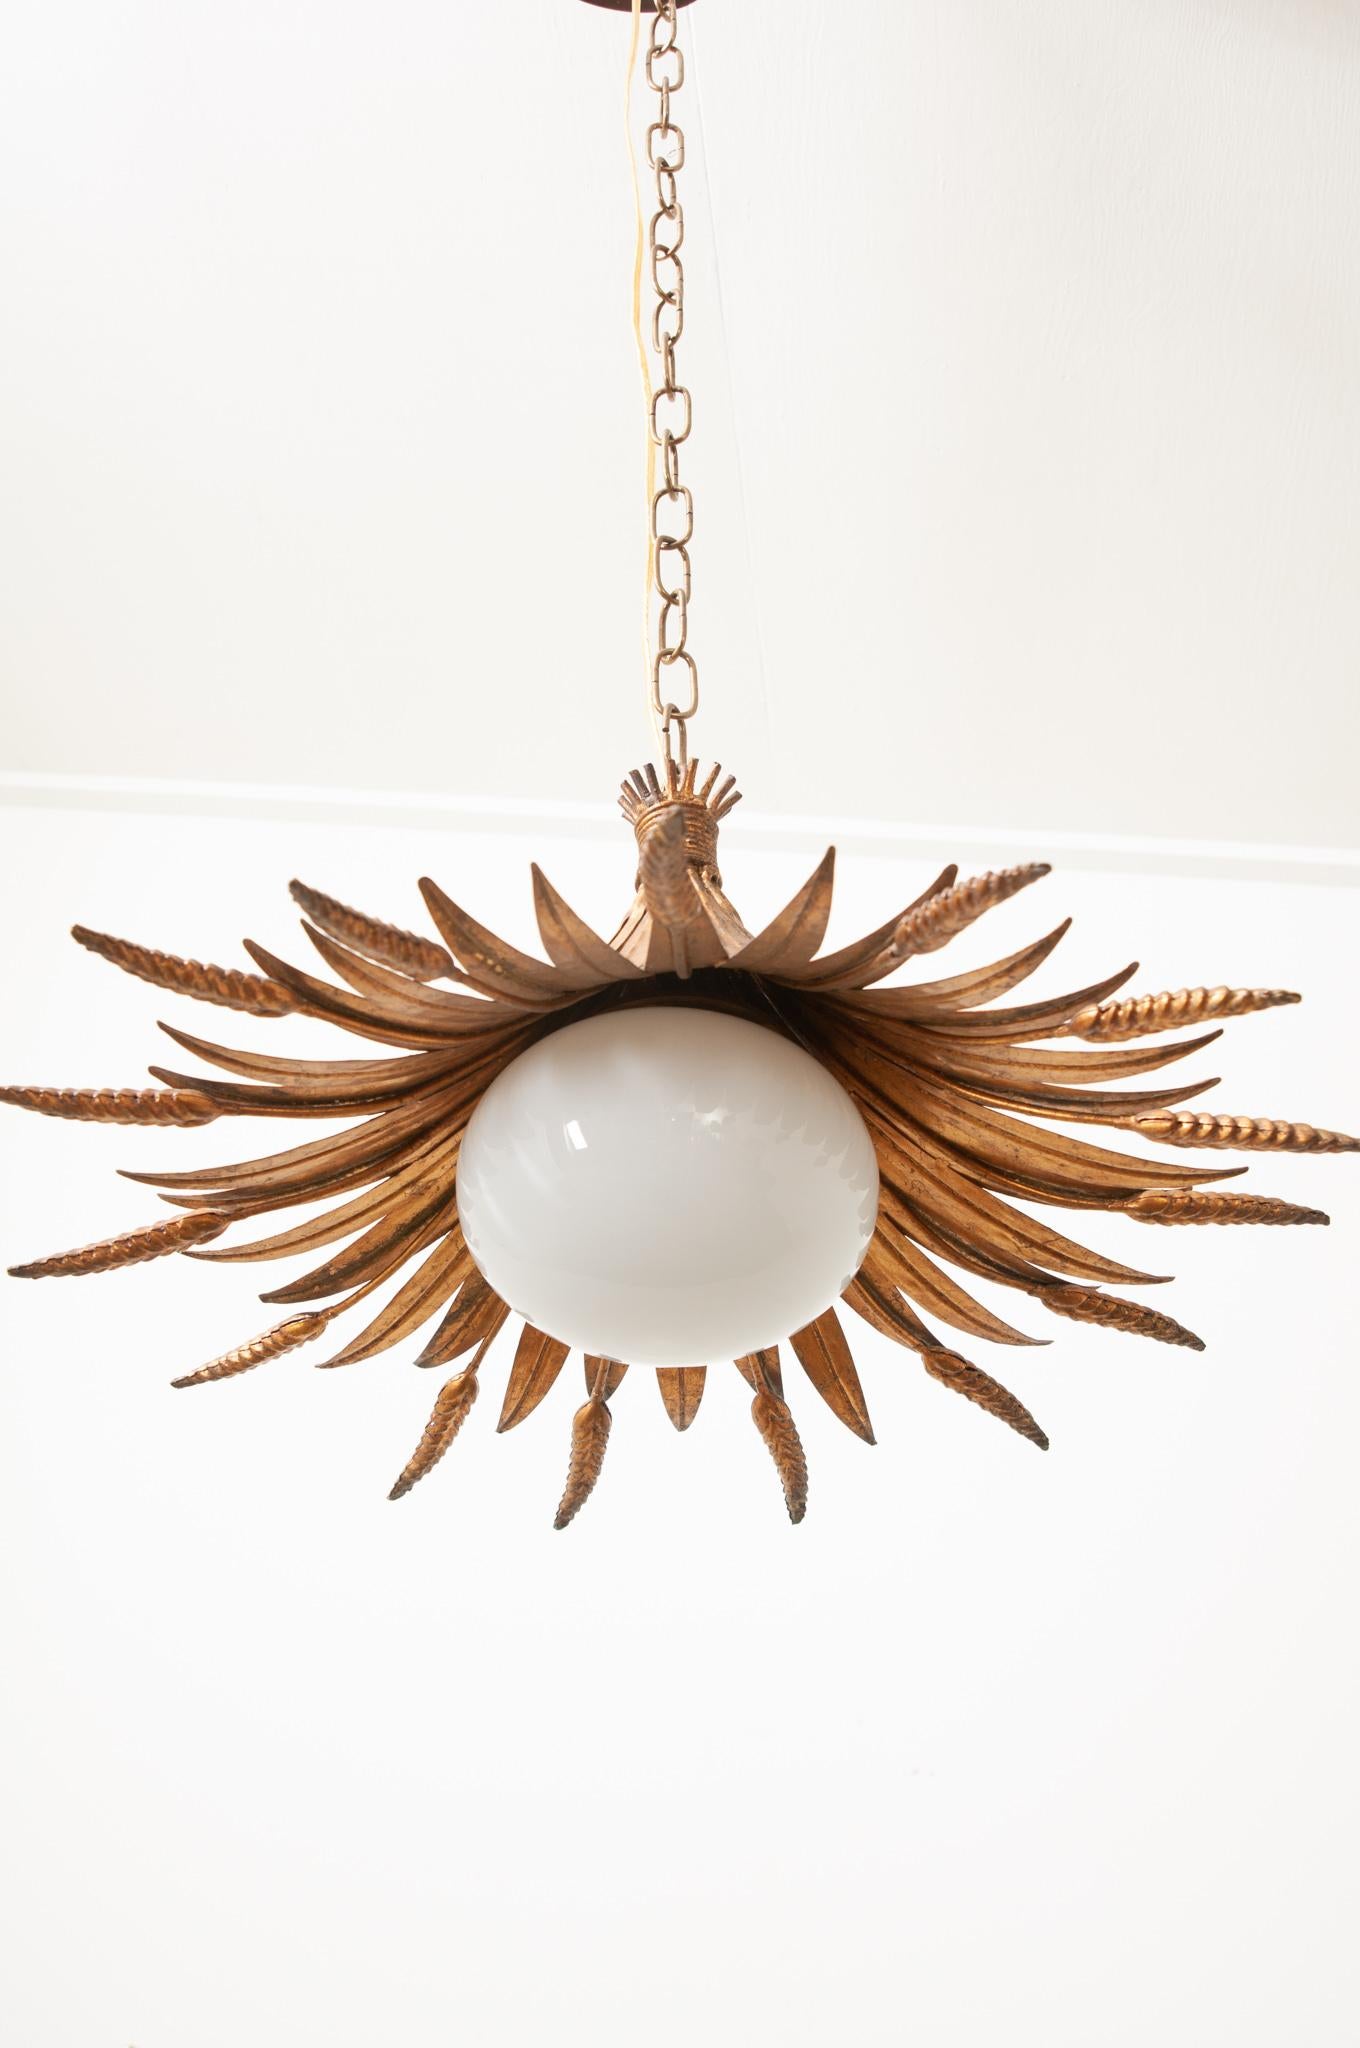 A playful vintage pendant from France is made of a brass wheat bouquet with a single bulb. The bulb is surrounded by a removable milk glass globe. This is the perfect light to give your interior a bit of whimsy. The single pendant comes with the